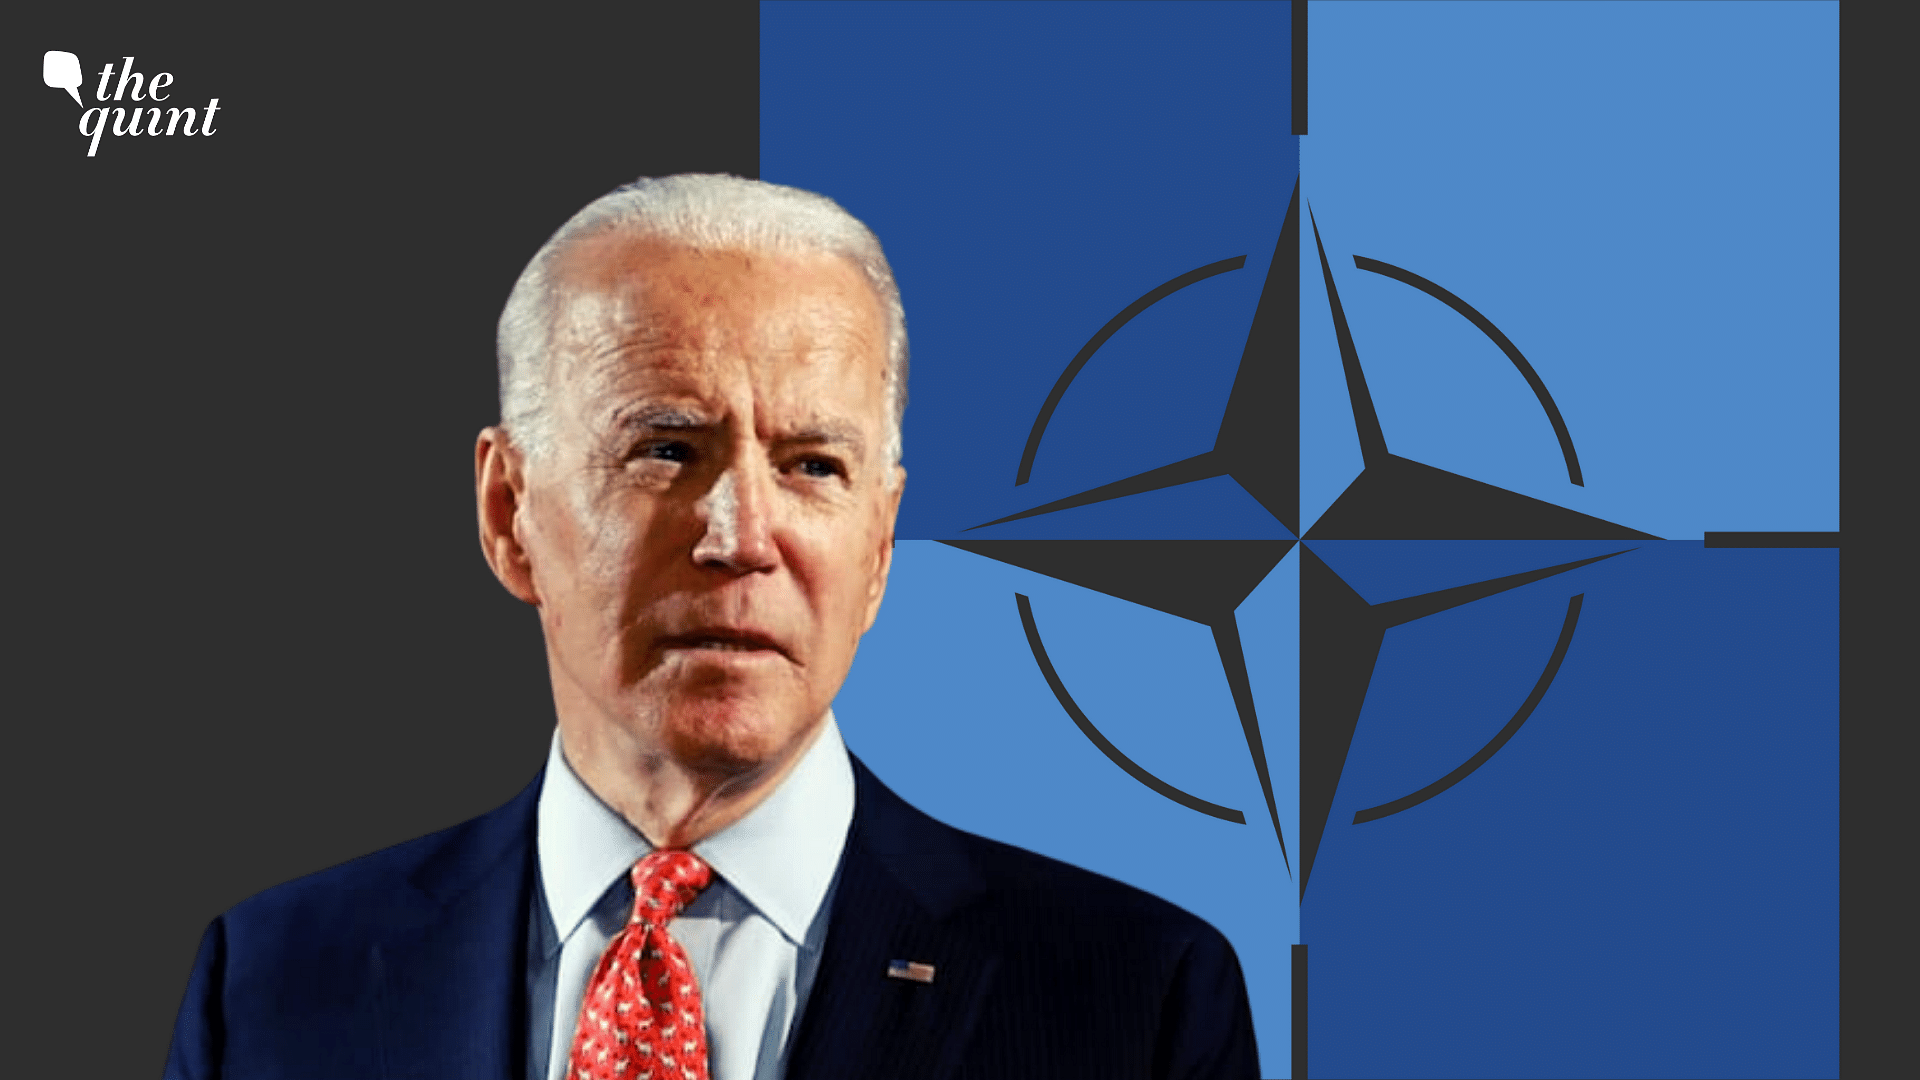 <div class="paragraphs"><p>In its new <a href="https://www.thequint.com/news/world/india-key-partner-russia-china-threats-biden-us-government-releases-first-national-security-strategy-nss-document-key-highlights">National Security Strategy (NSS)</a> released last week, the Biden administration has declared that <a href="https://www.thequint.com/topic/china">China</a> is the “most consequential geopolitical challenge” that the US confronts along with constraining a rampant Russia.</p></div>